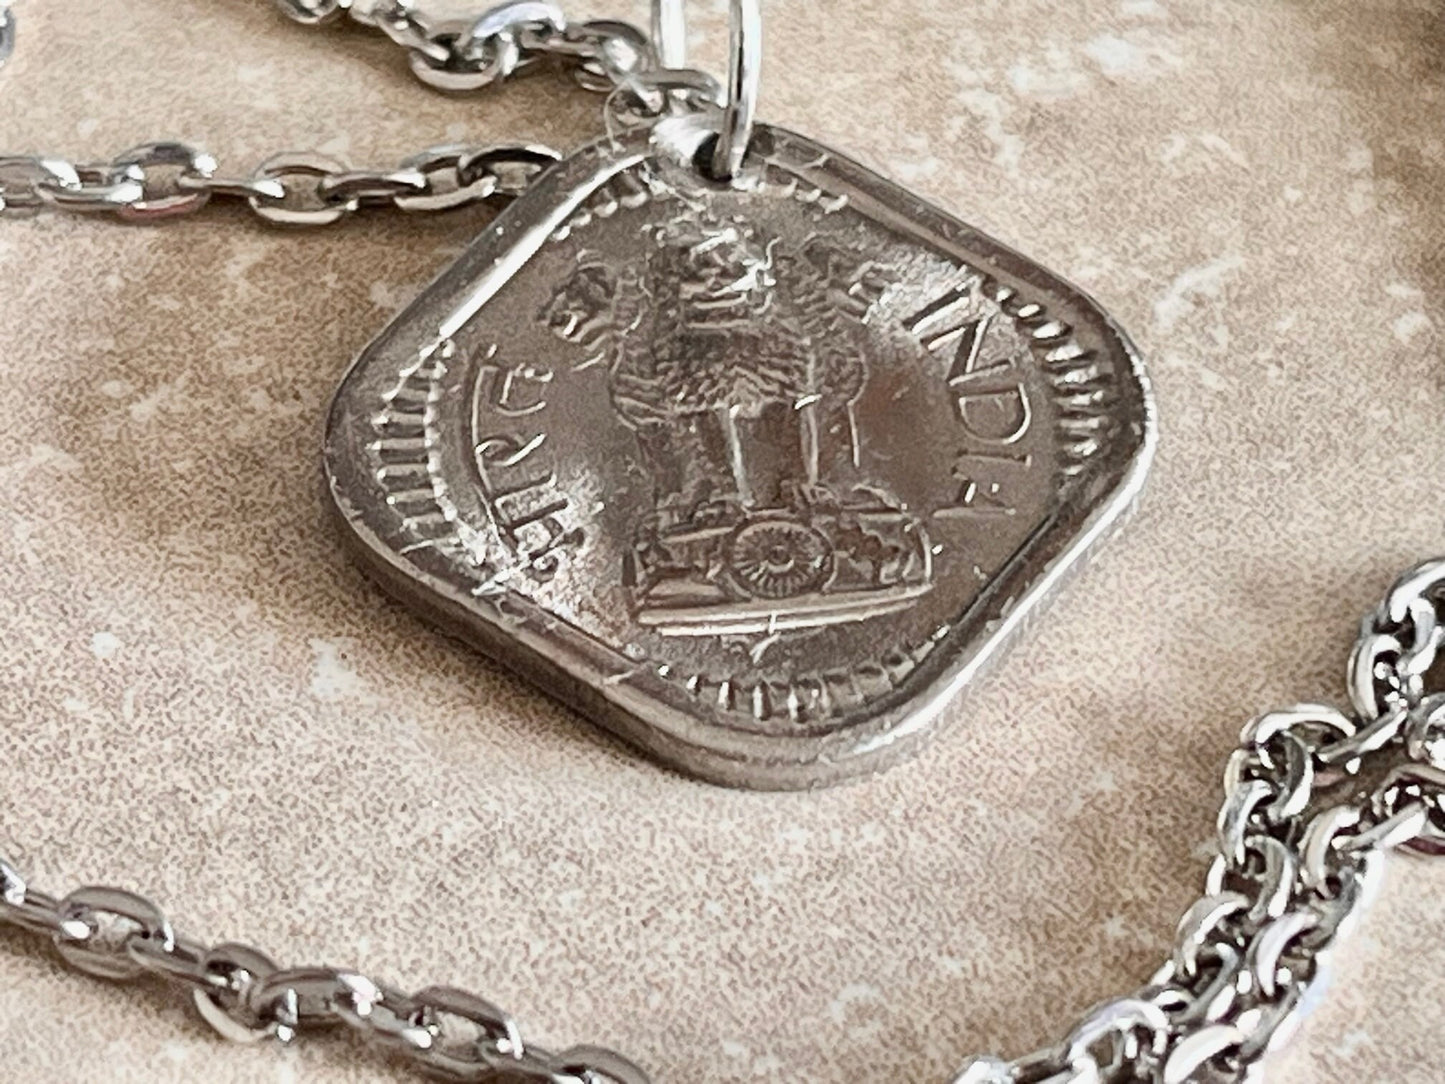 India Coin Necklace Indian East India 5 Annas Square Coin Personal Handmade Jewelry Gift Friend Charm For Him Her World Coin Collector